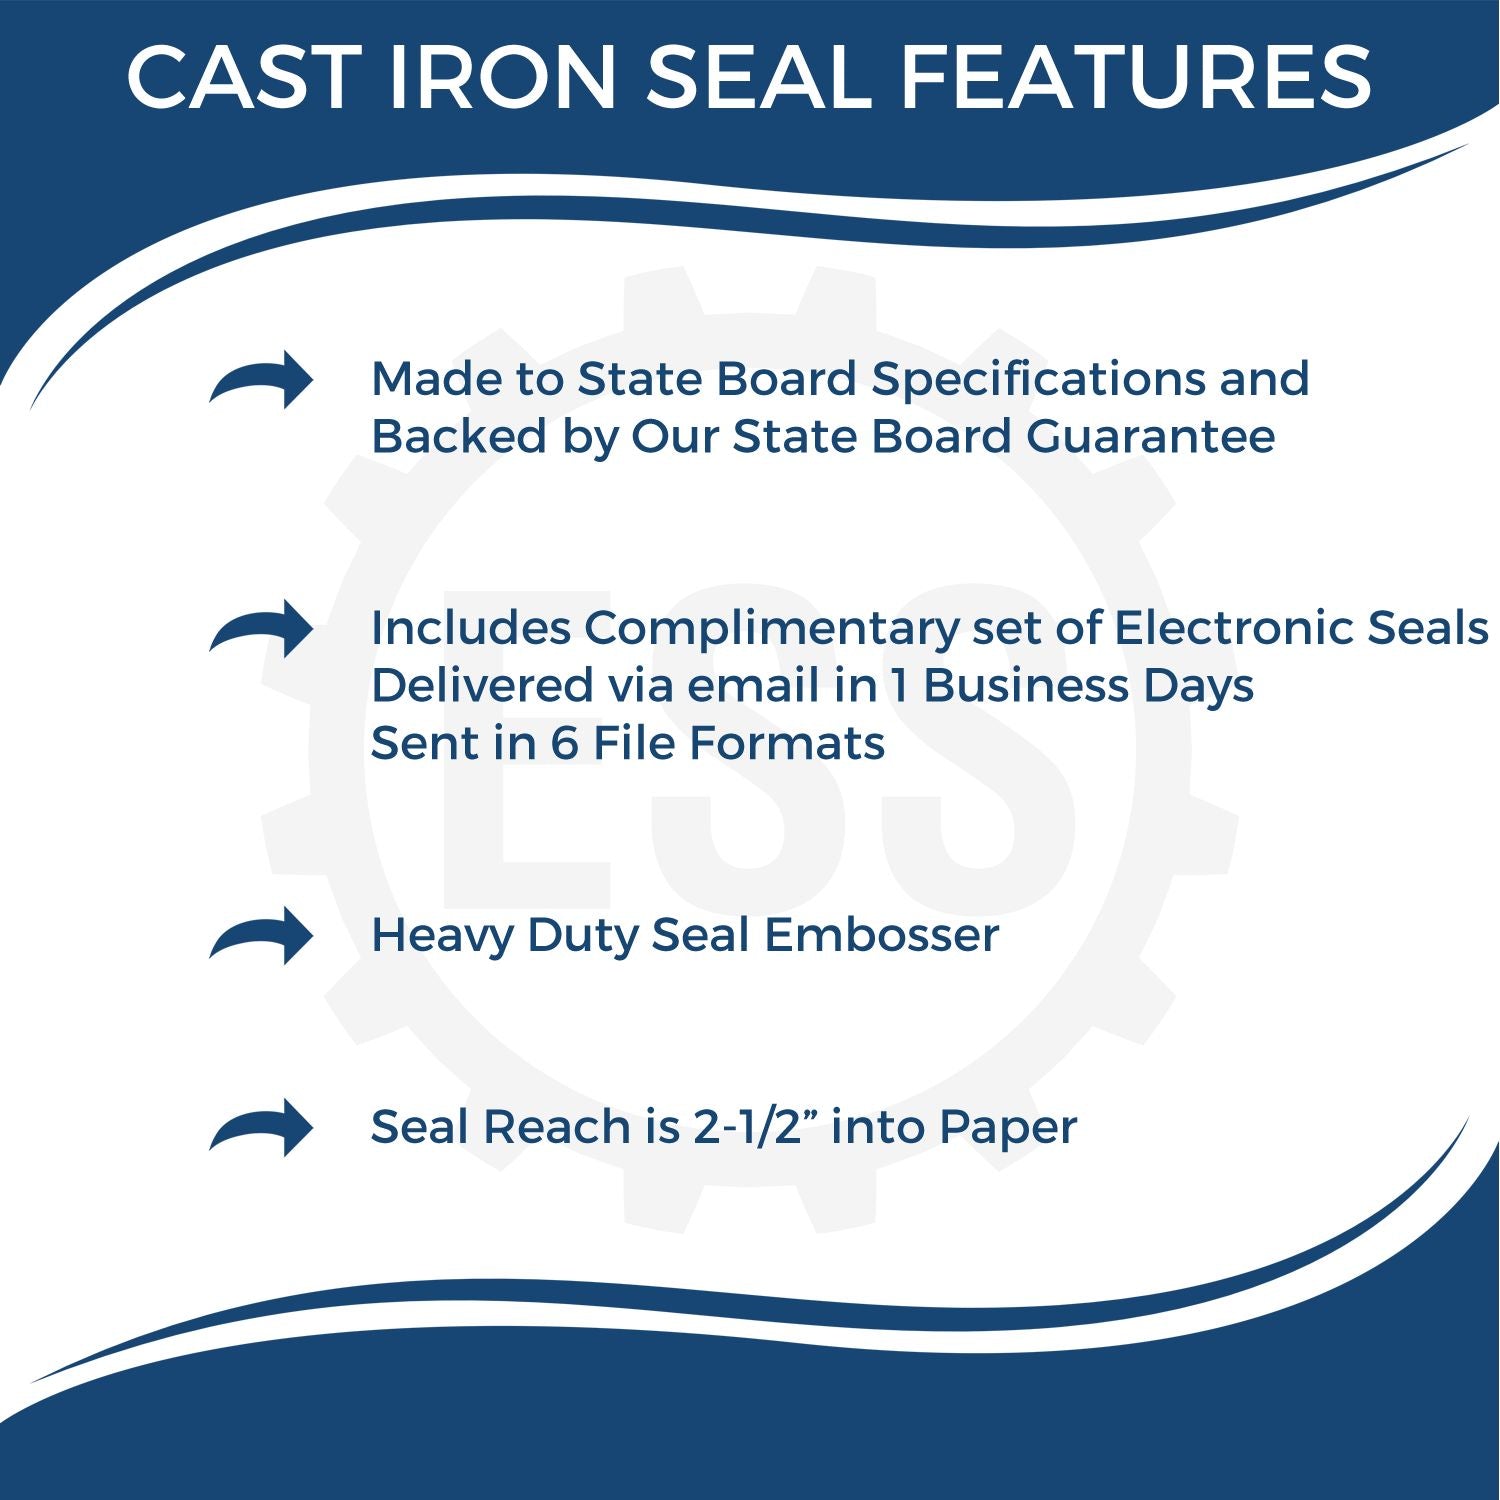 The main image for the Heavy Duty Cast Iron Minnesota Engineer Seal Embosser depicting a sample of the imprint and electronic files